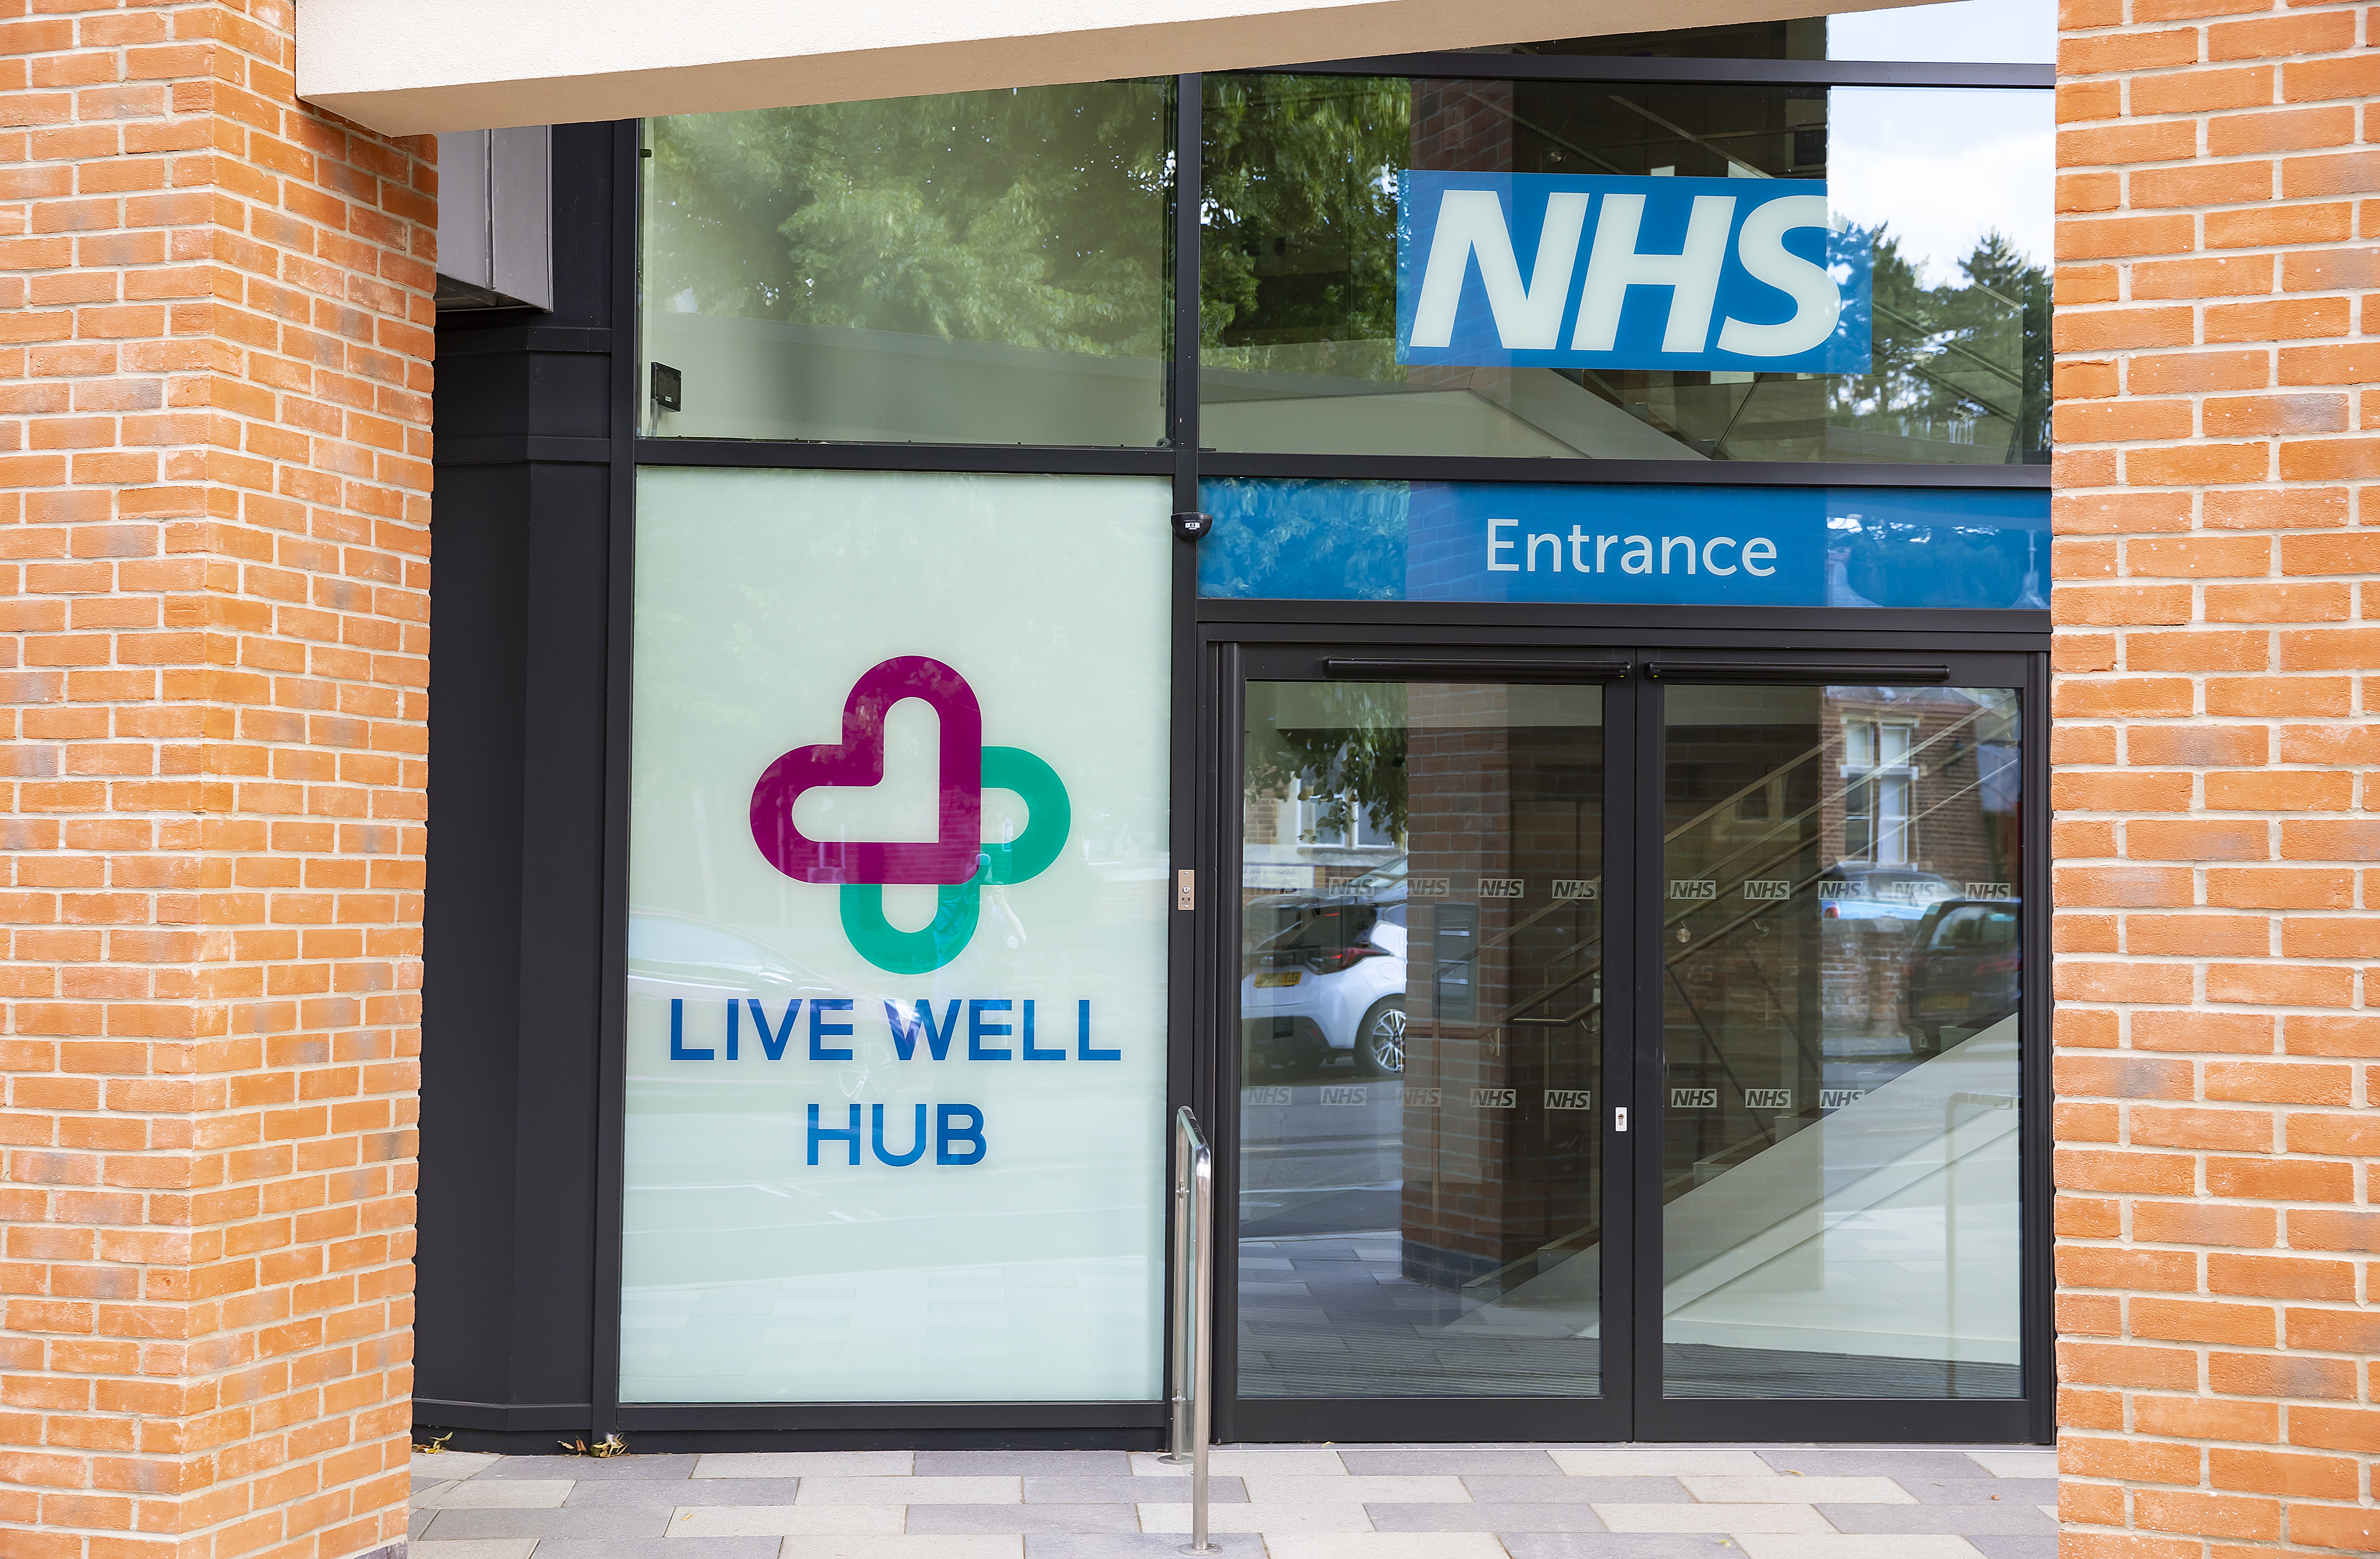 Entrance to the Livewell hub with NHS branding